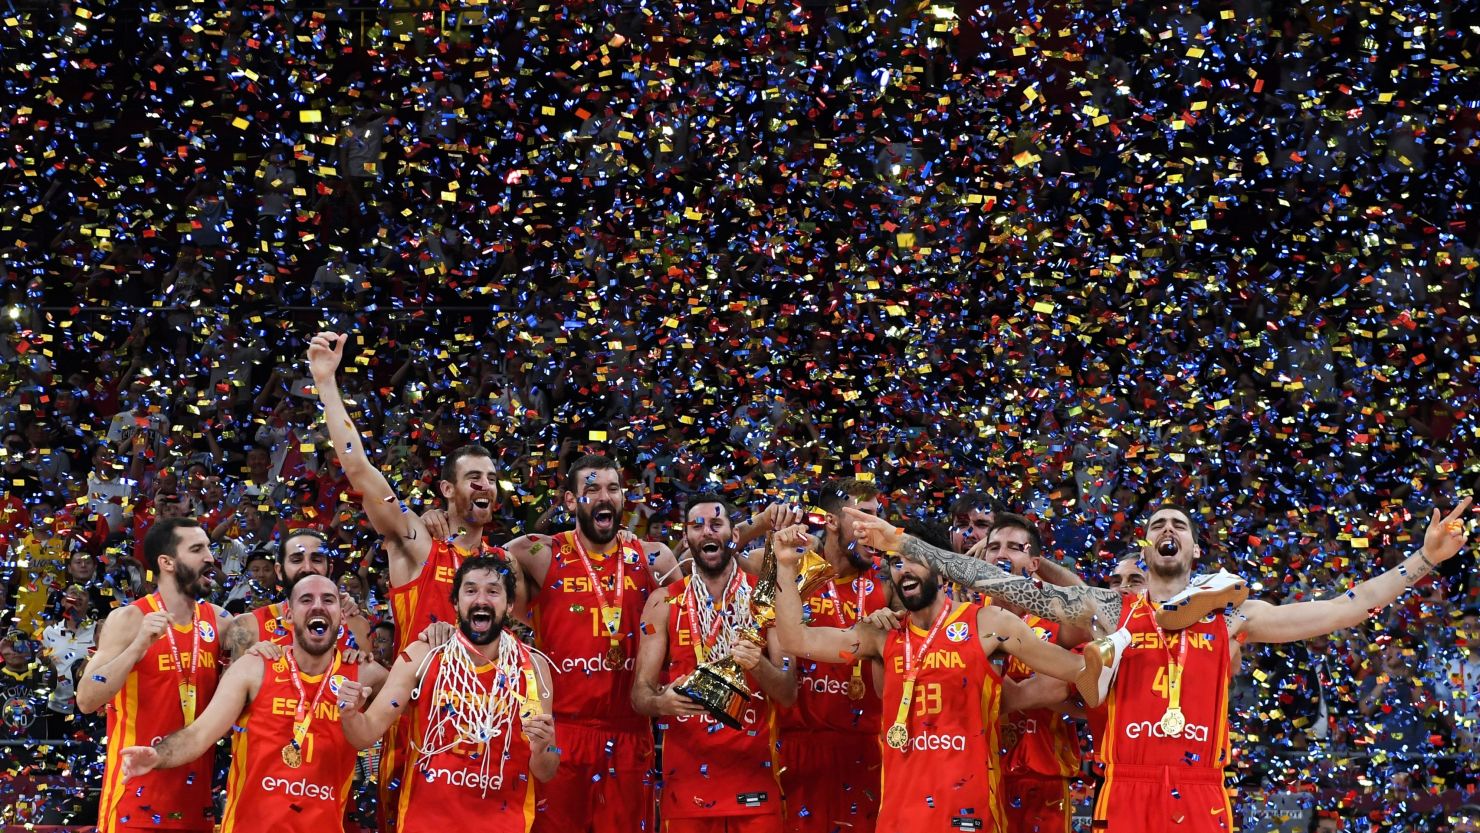 Spain won its second FIBA basketball World Cup on Suday, defeating Argentina 95-75.